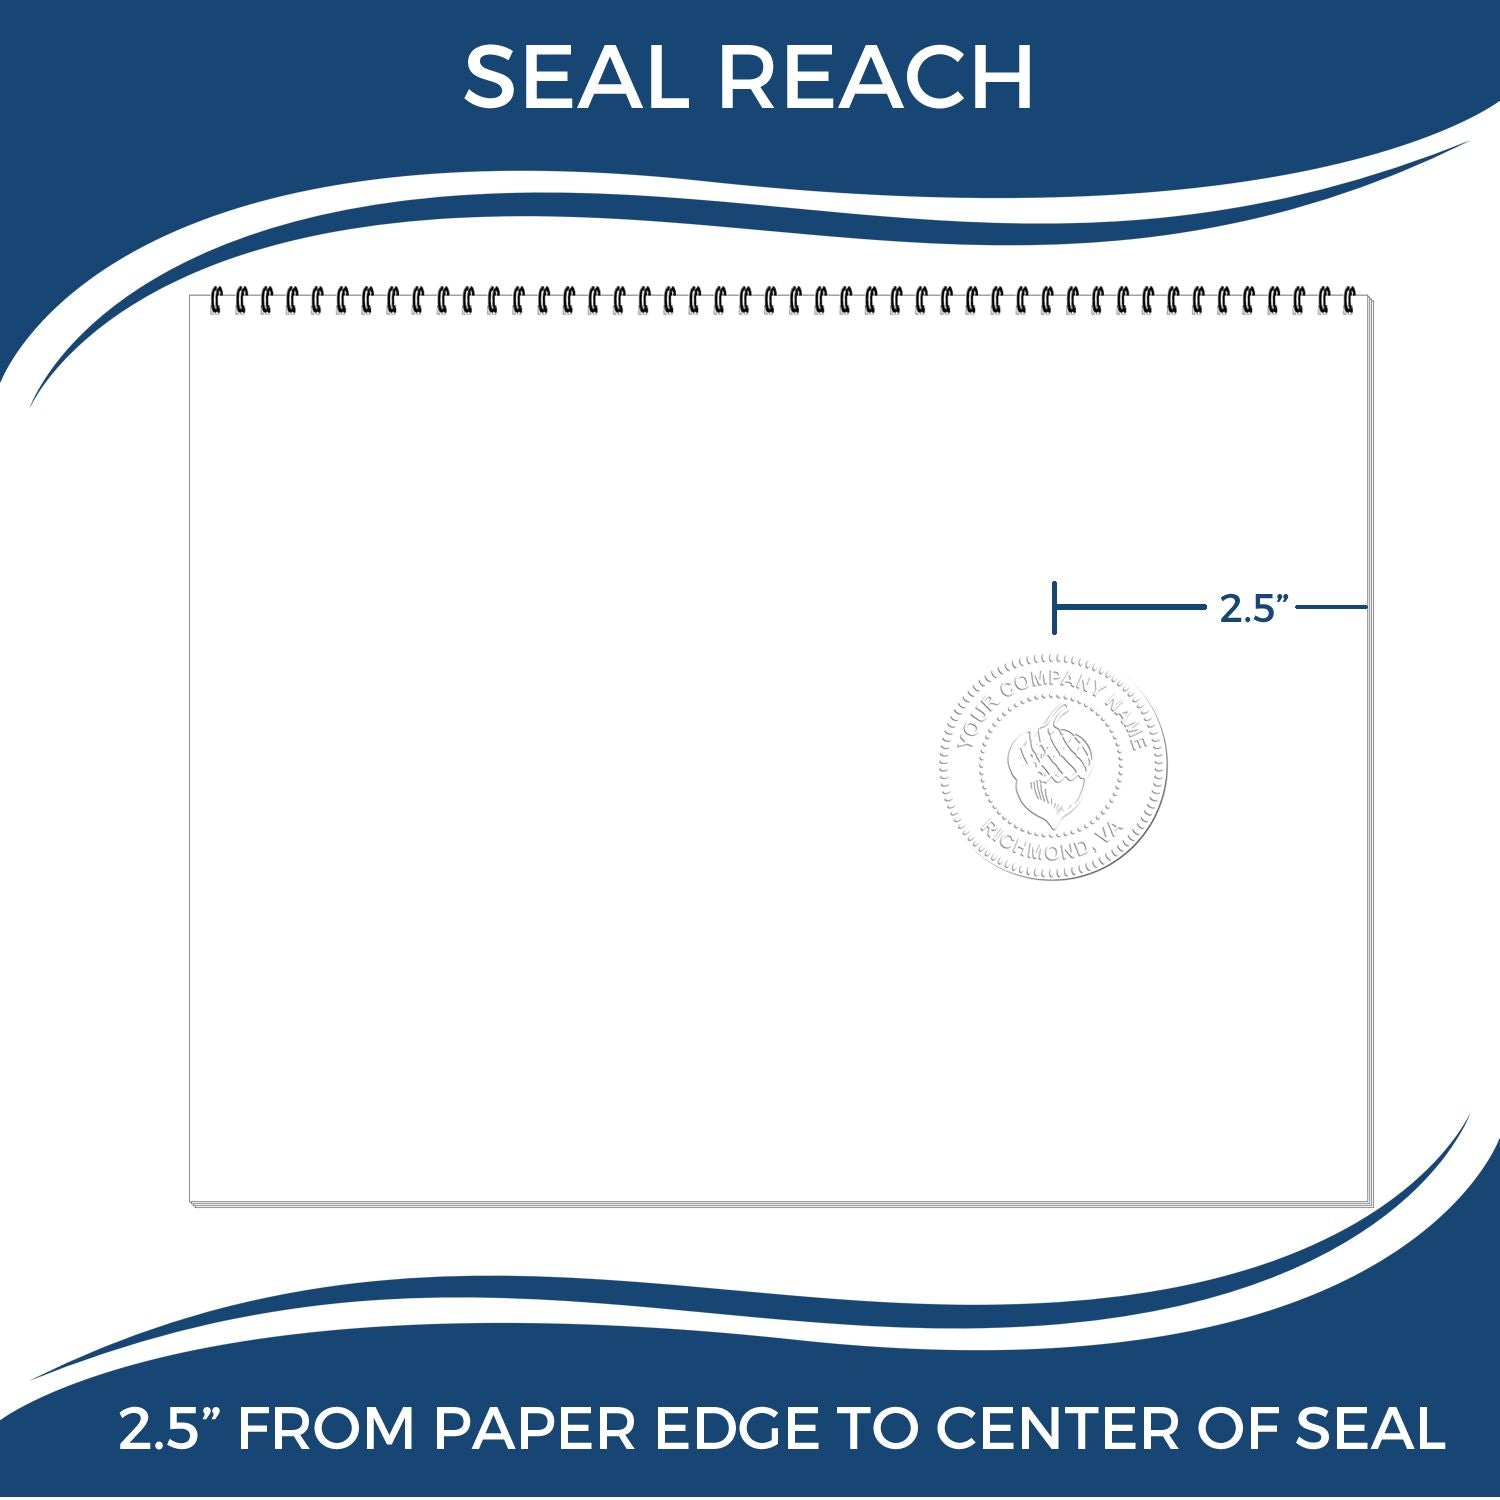 An infographic showing the seal reach which is represented by a ruler and a miniature seal image of the Long Reach Maryland Geology Seal